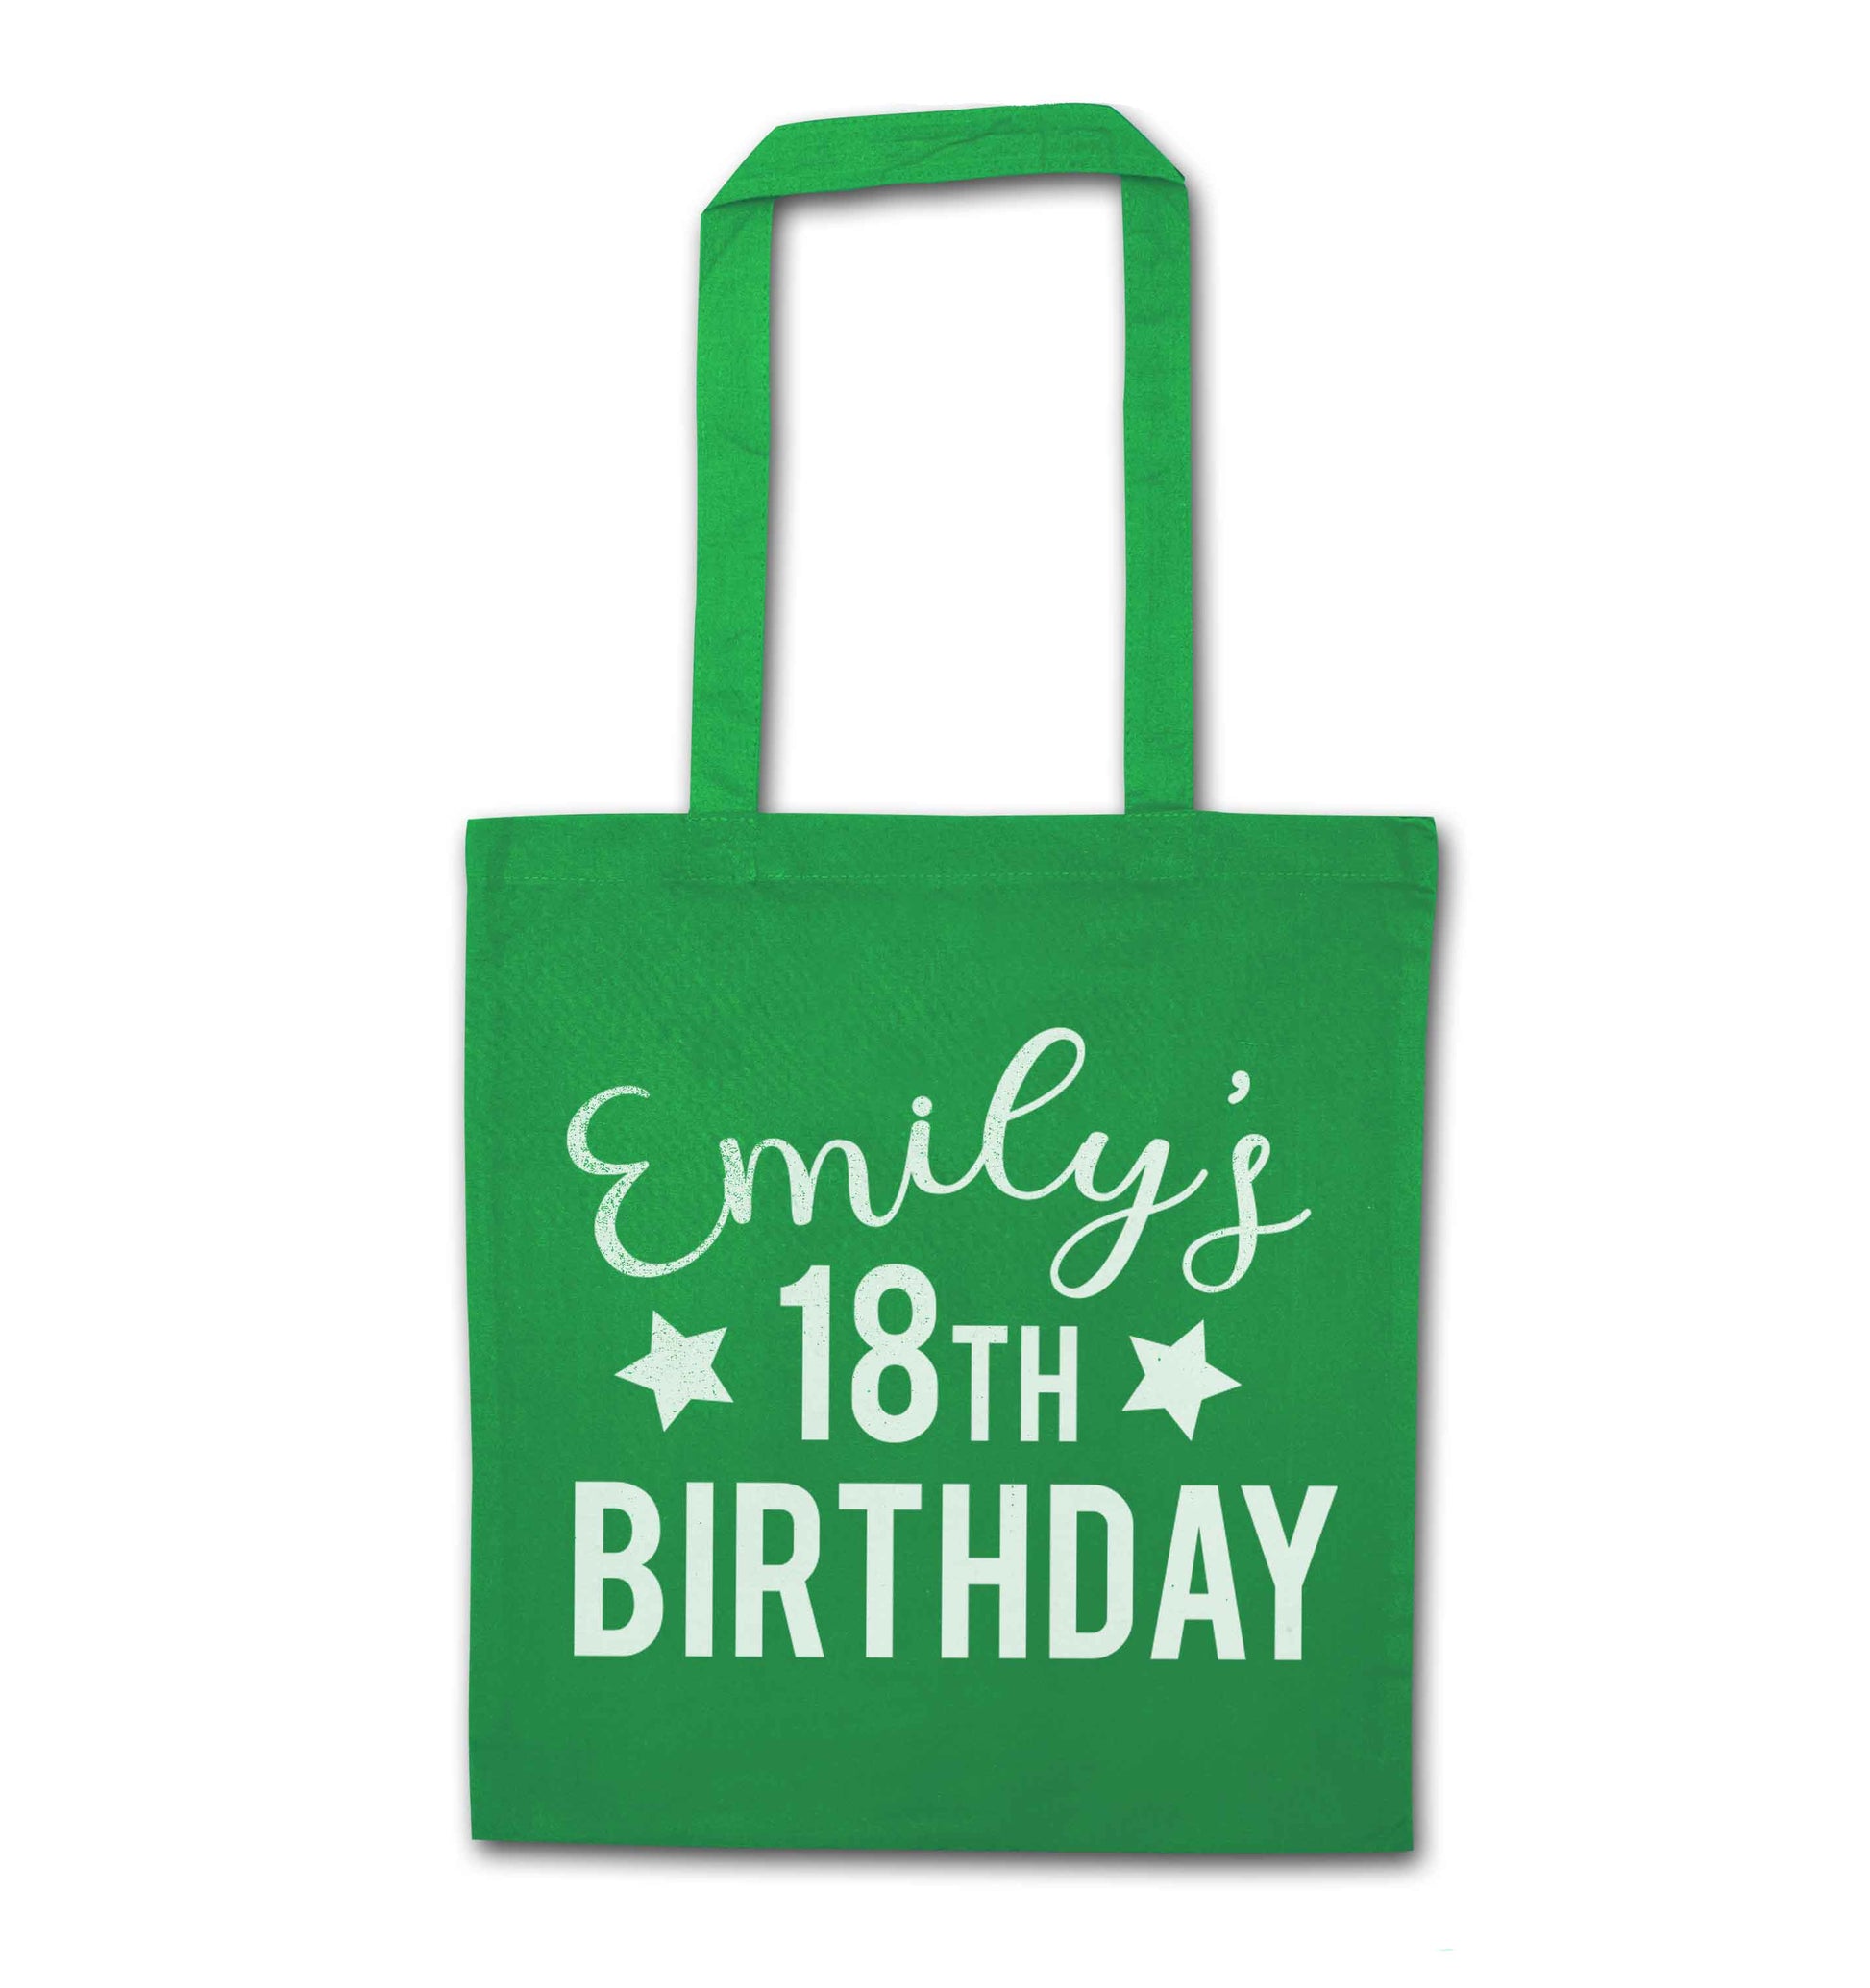 Personalised 18th birthday green tote bag